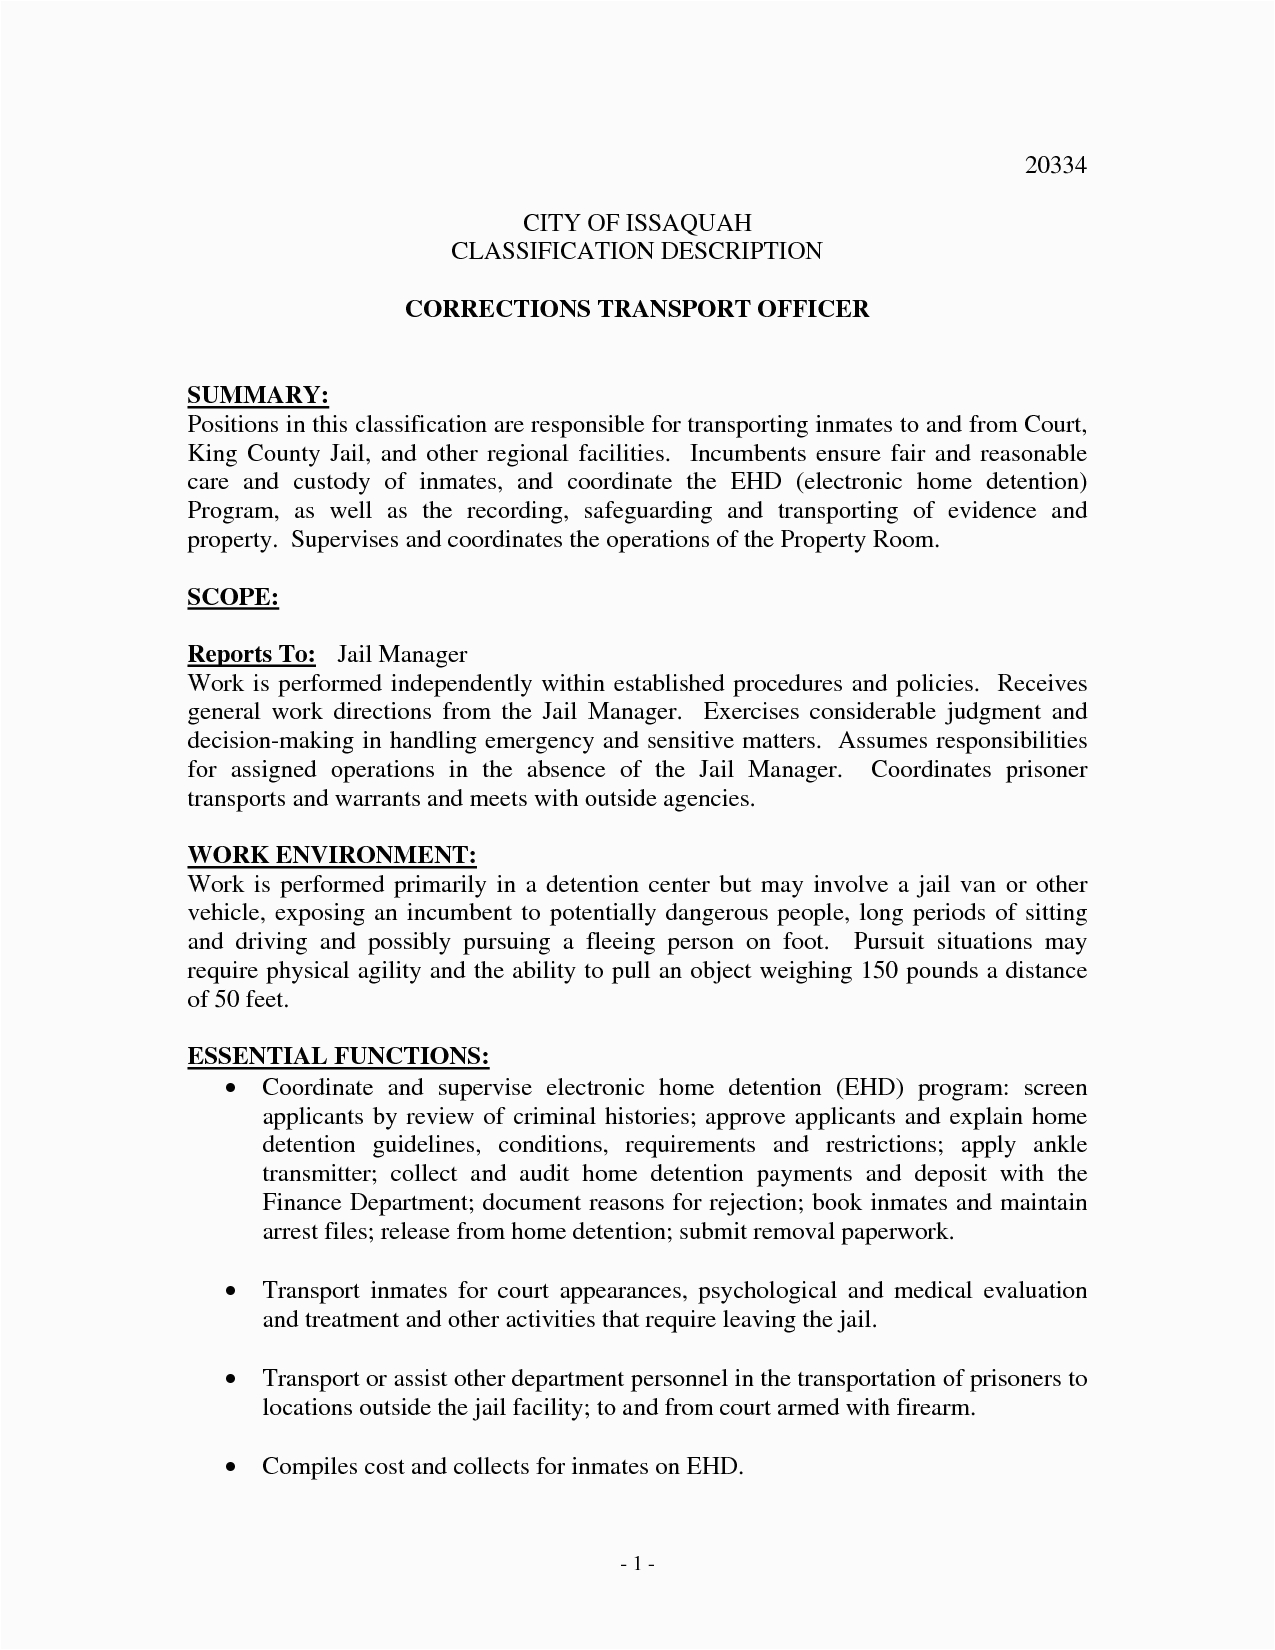 Sample Correctional Officer Resume with No Experience Correctional Ficer Resume No Experience